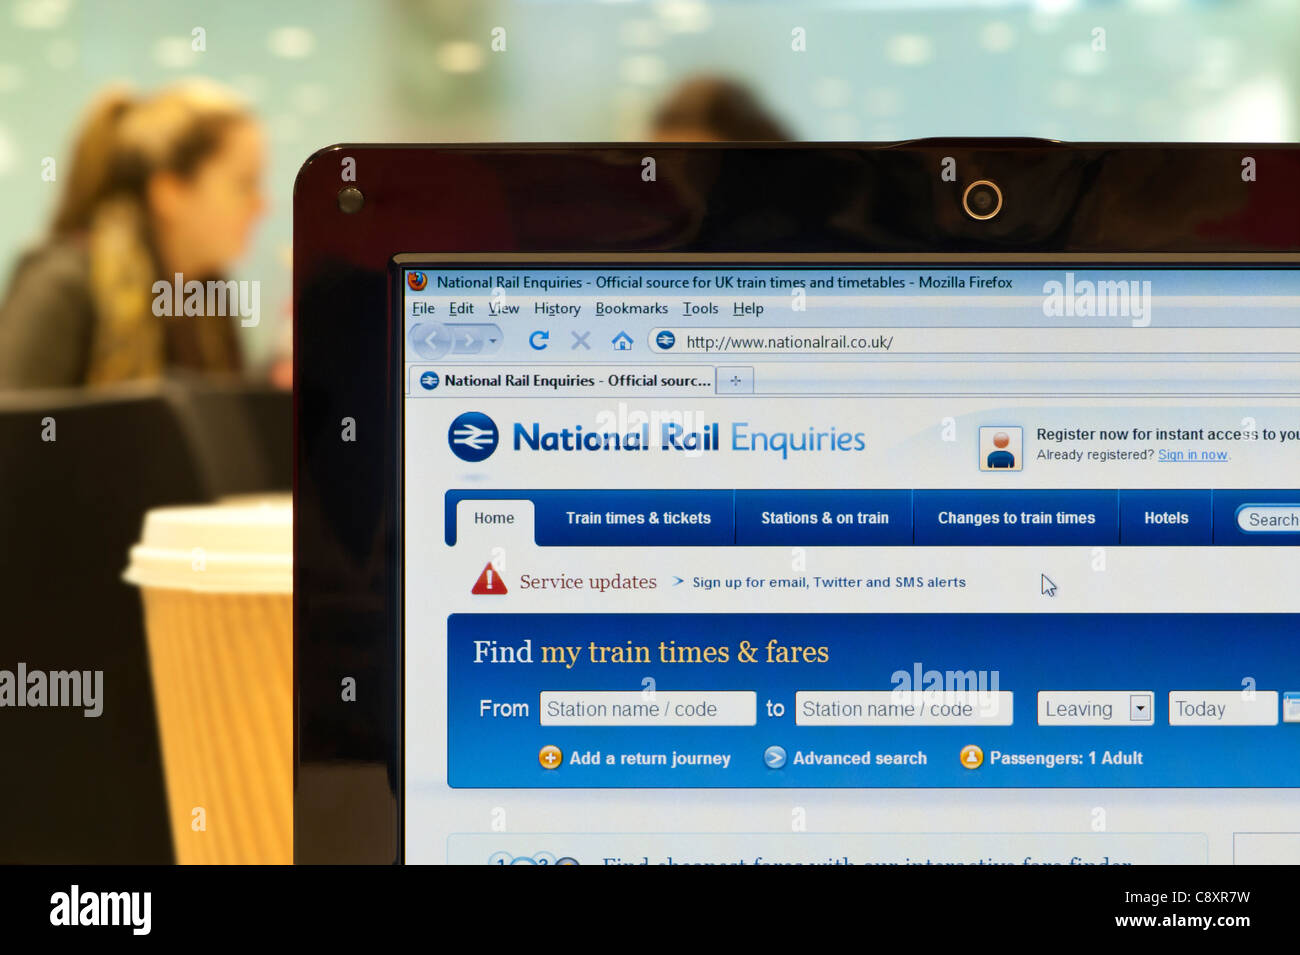 The National Rail website shot in a coffee shop environment (Editorial use only: print, TV, e-book and editorial website). Stock Photo